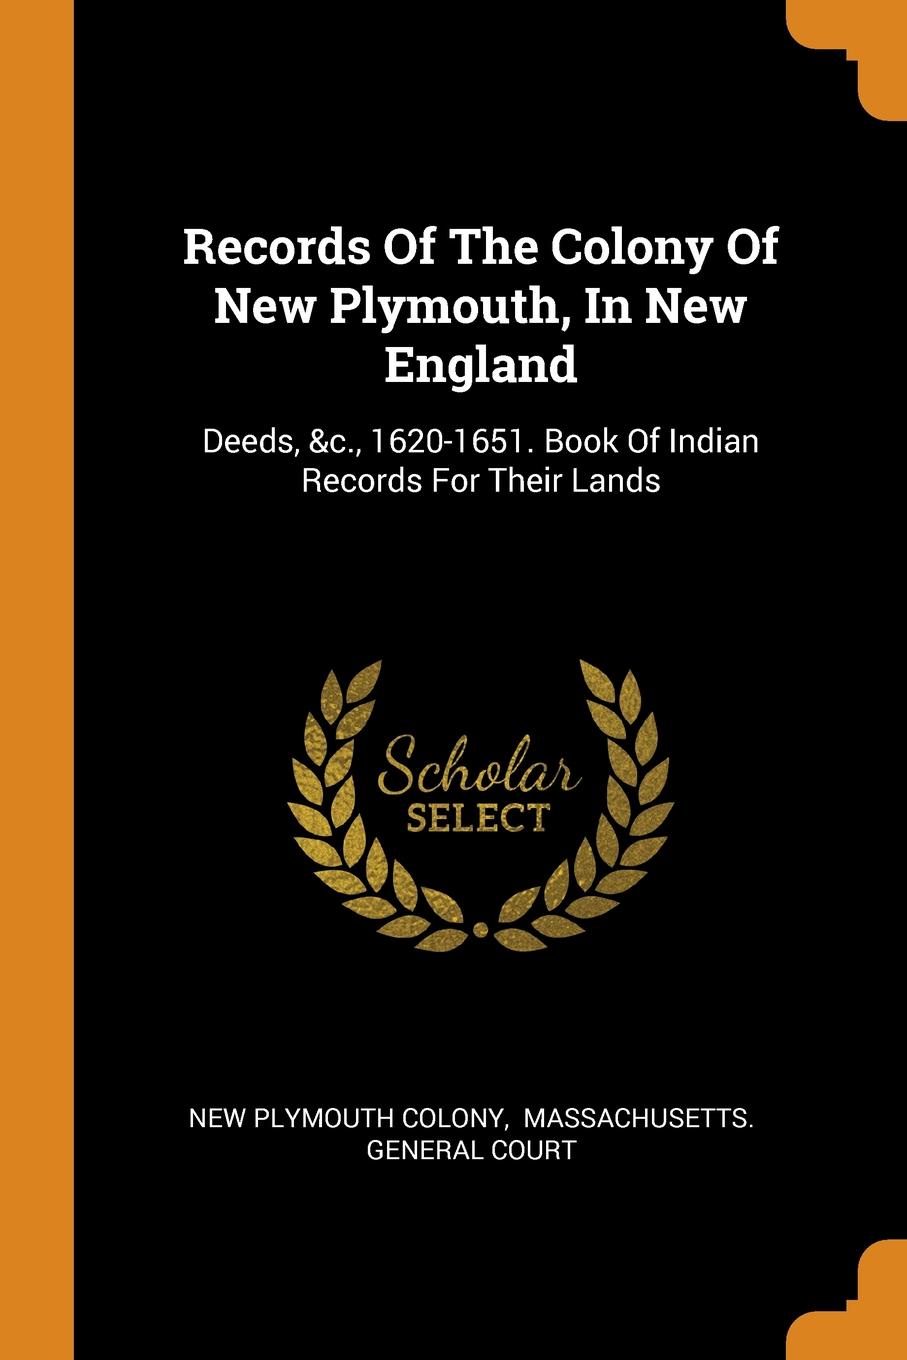 Records Of The Colony Of New Plymouth, In New England. Deeds, .c., 1620-1651. Book Of Indian Records For Their Lands